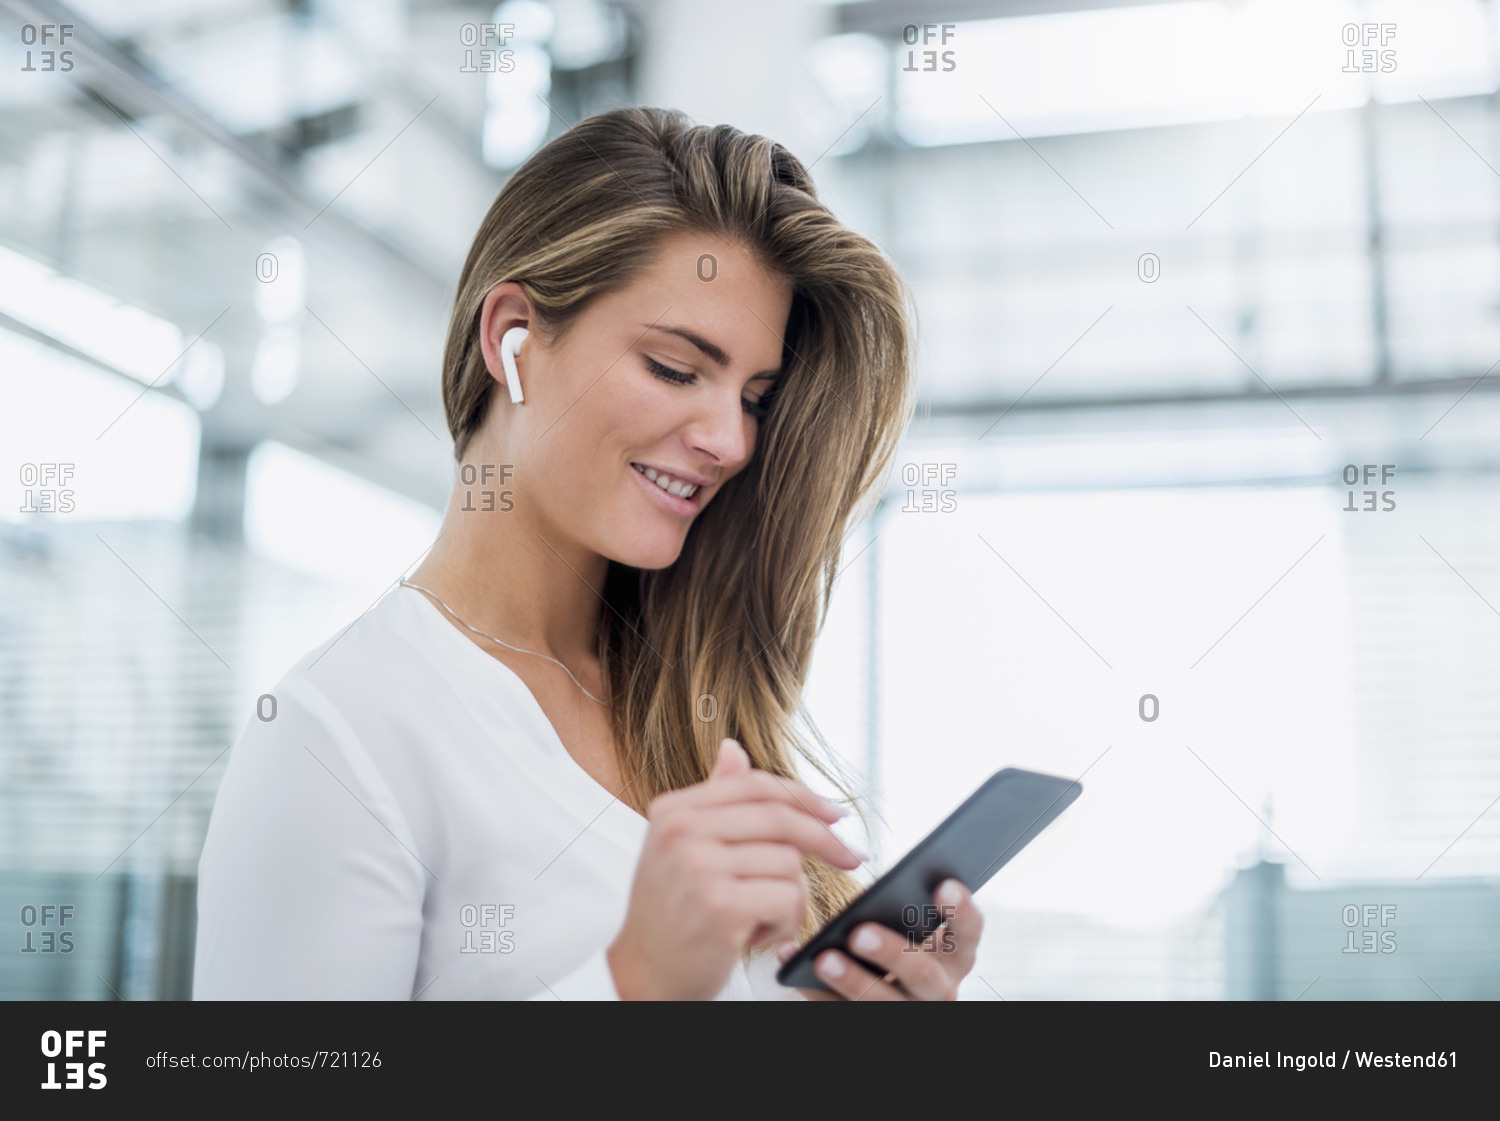 Smiling young woman wearing in-ear phone using cell phone